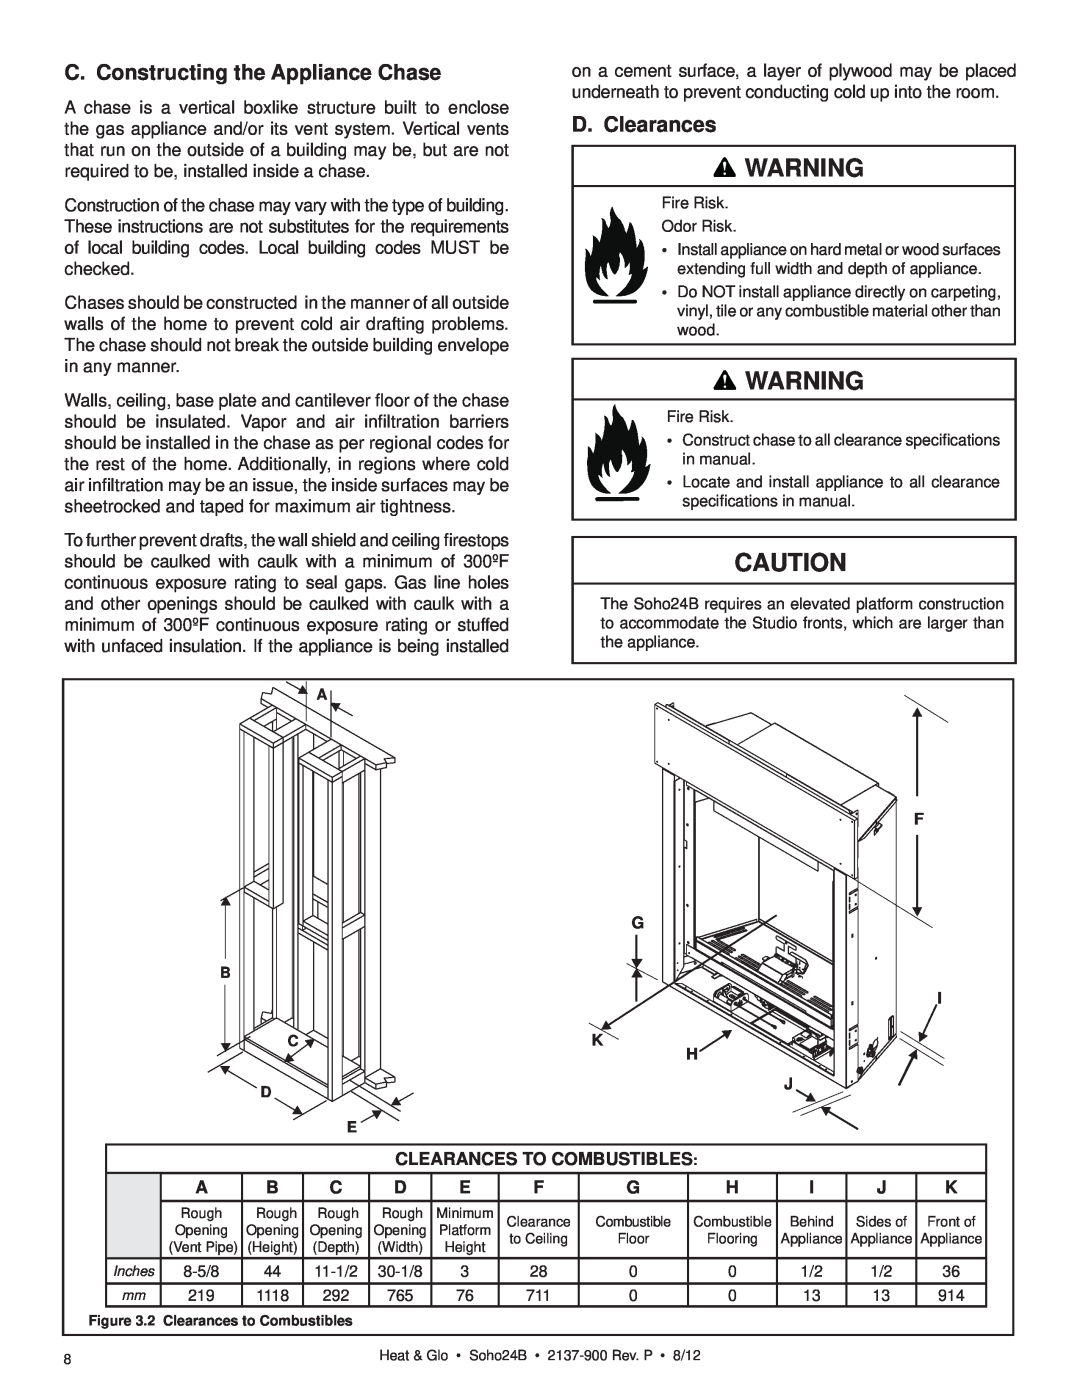 Heat & Glo LifeStyle 2137-900 owner manual C. Constructing the Appliance Chase, D. Clearances 